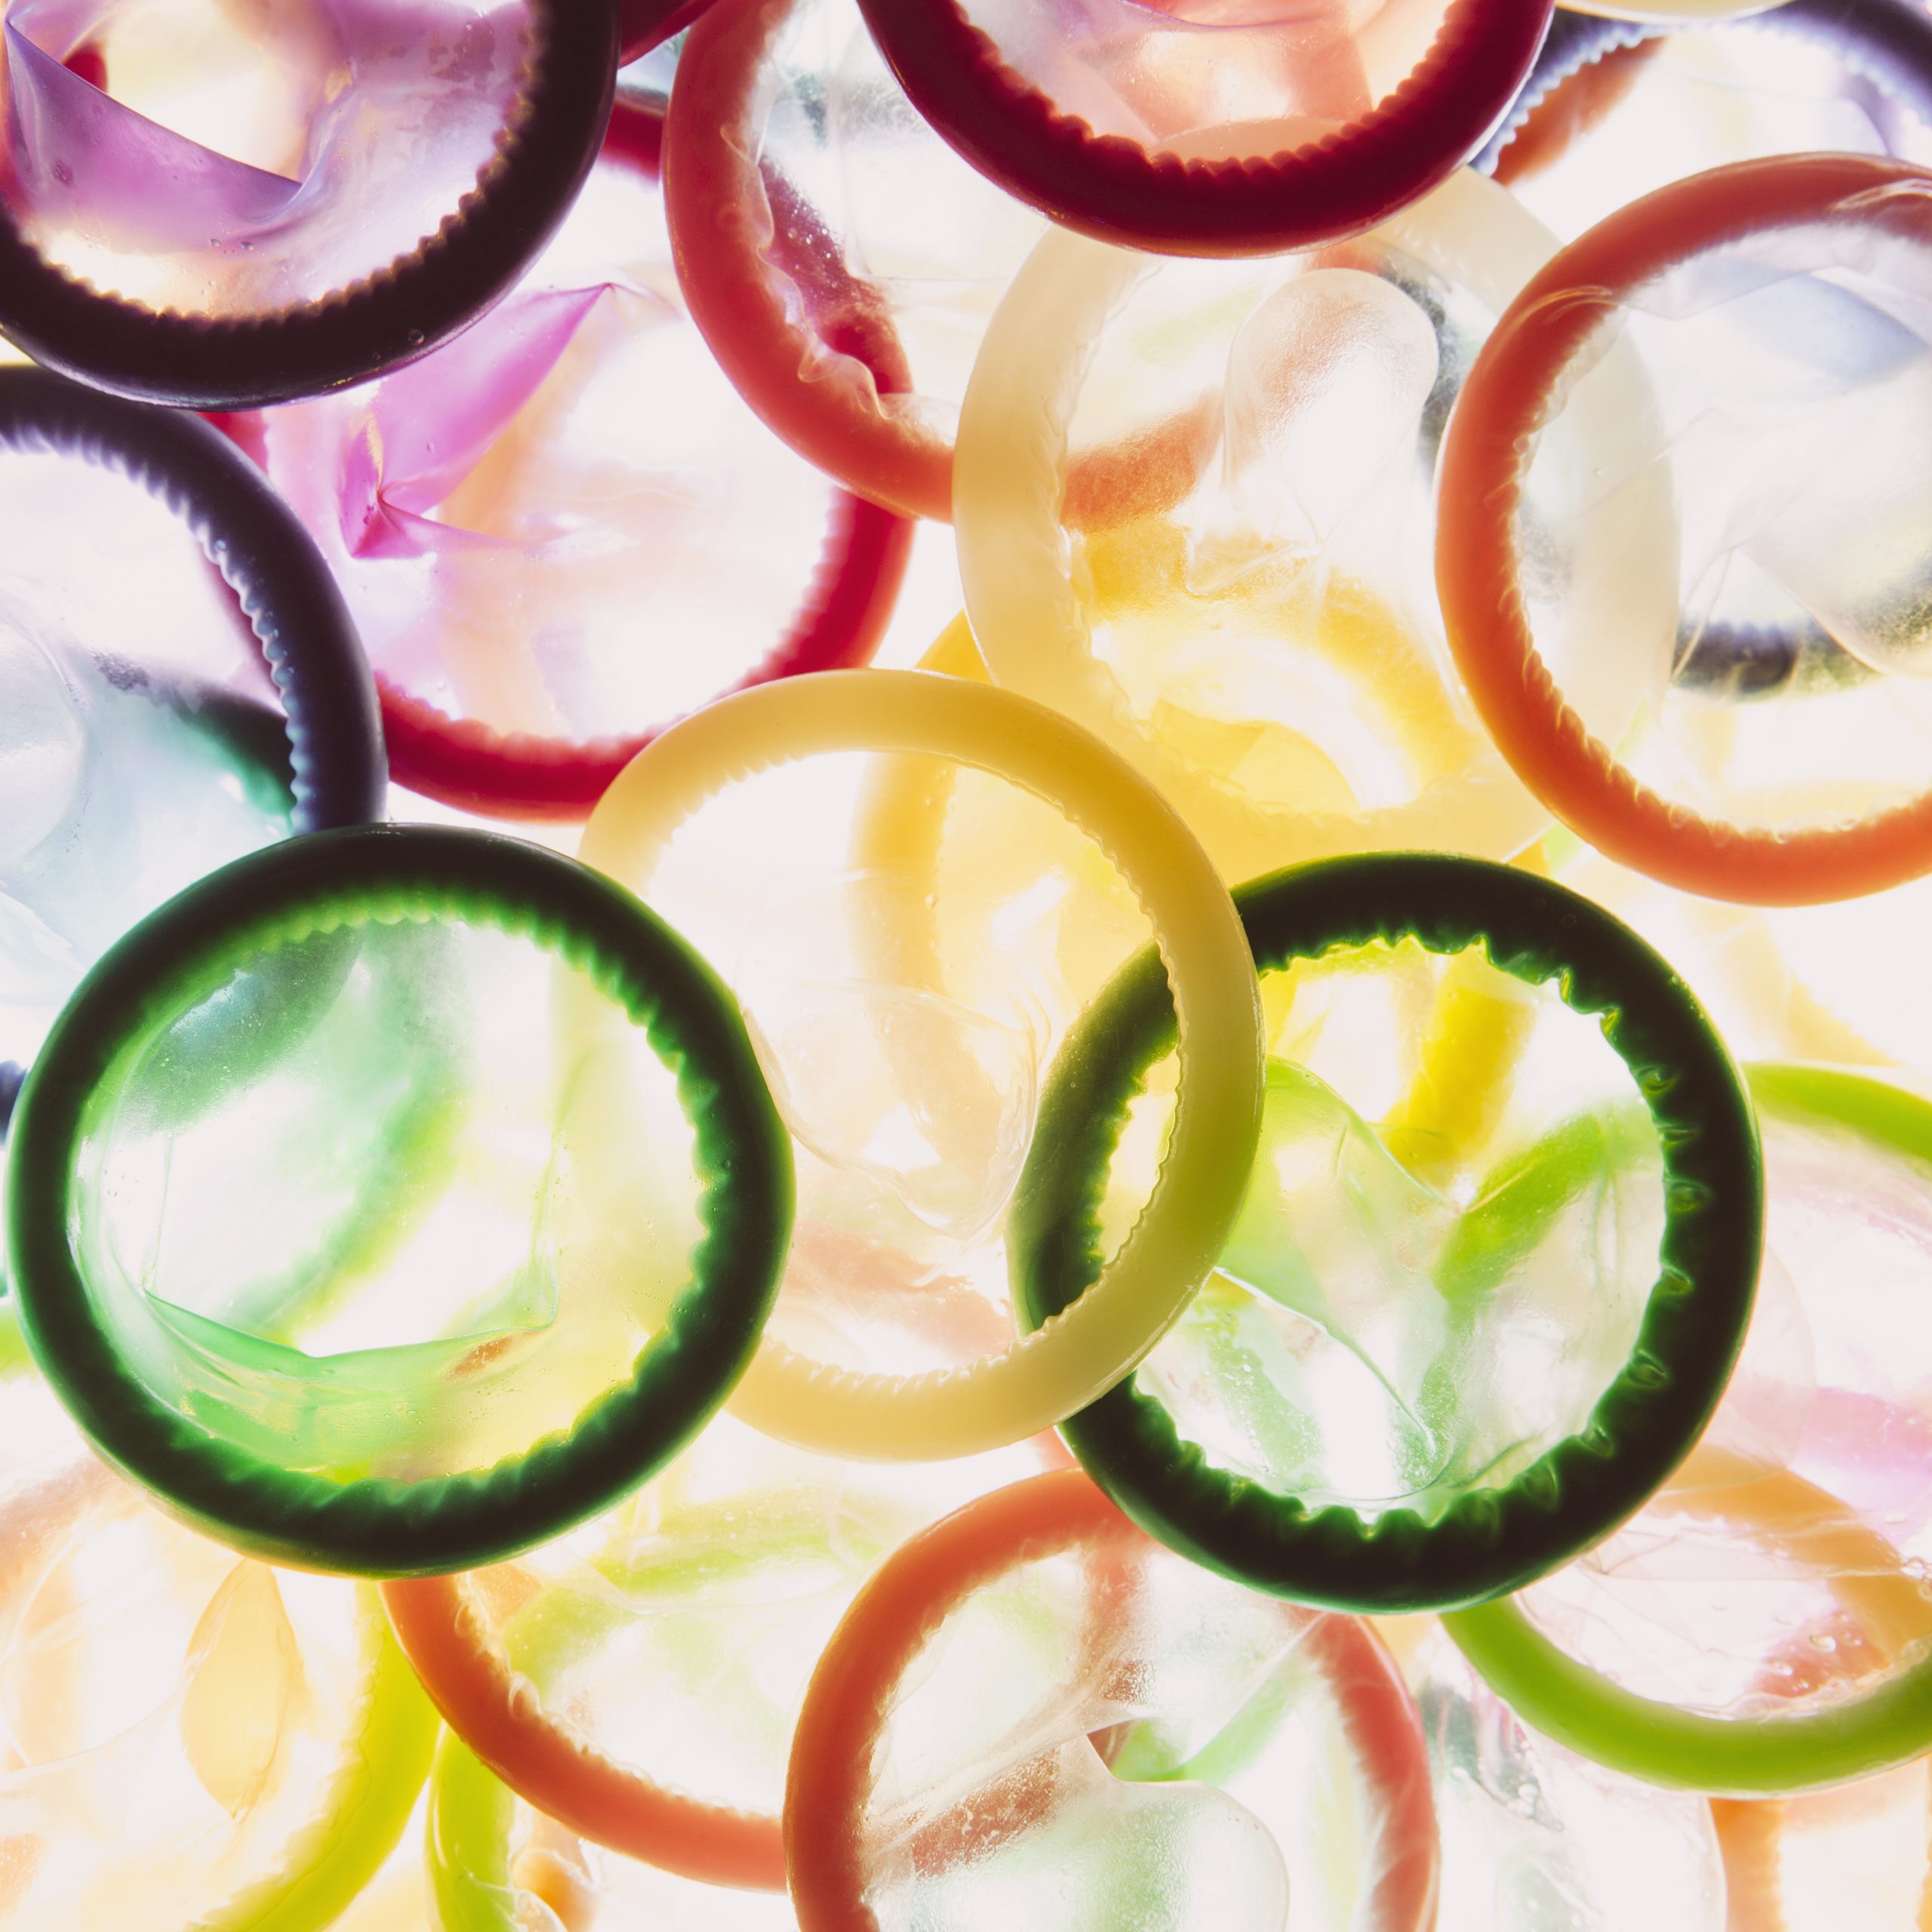 Large grouping of multi-colored condoms on white background,USA,A large group of multi-colored condoms displayed on a white background. Heaped up.